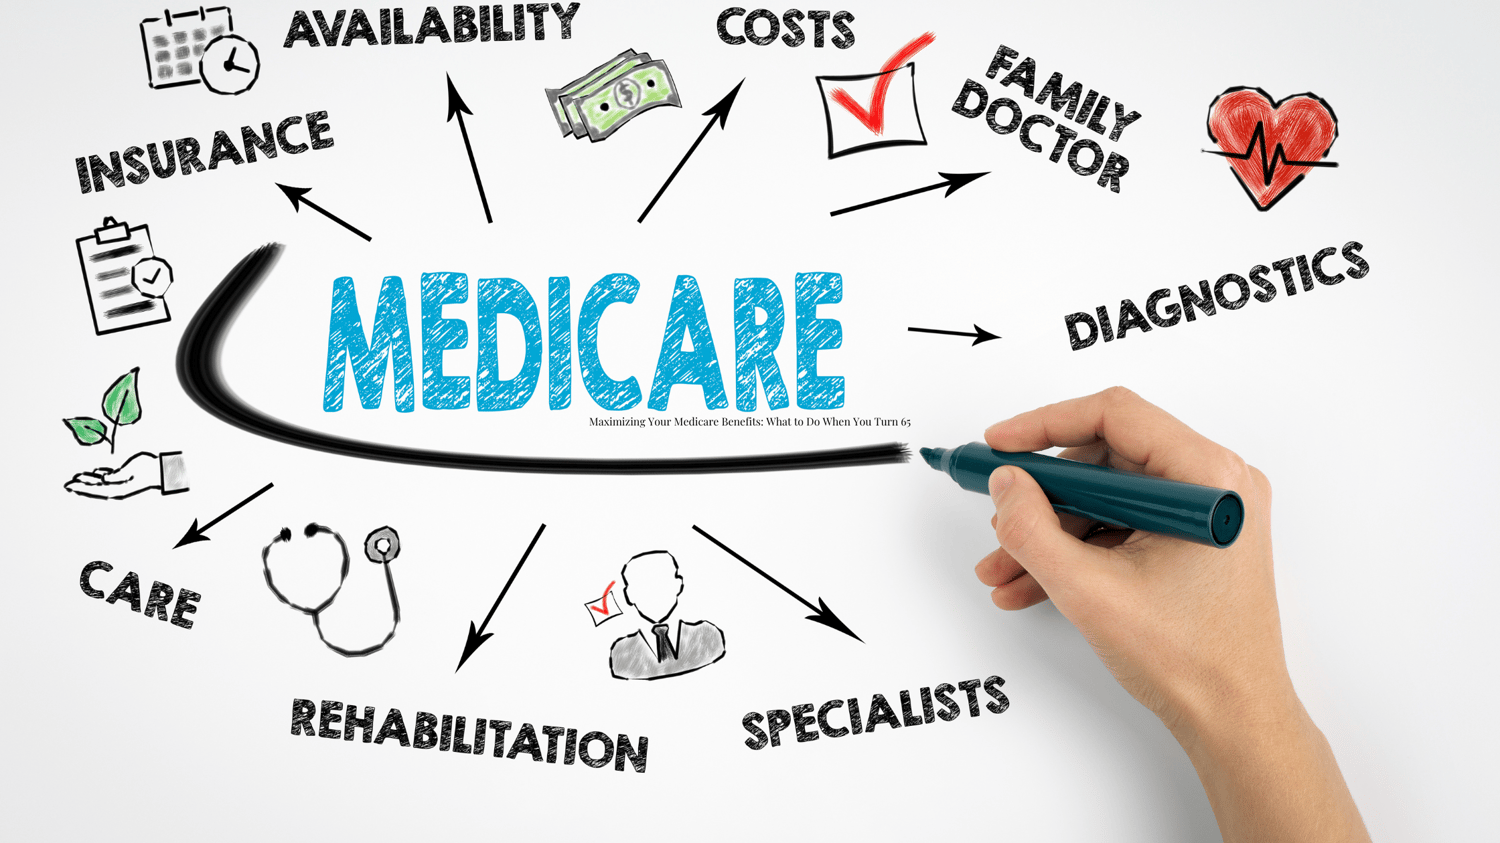 Maximizing Your Medicare Benefits: What to Do When You Turn 65